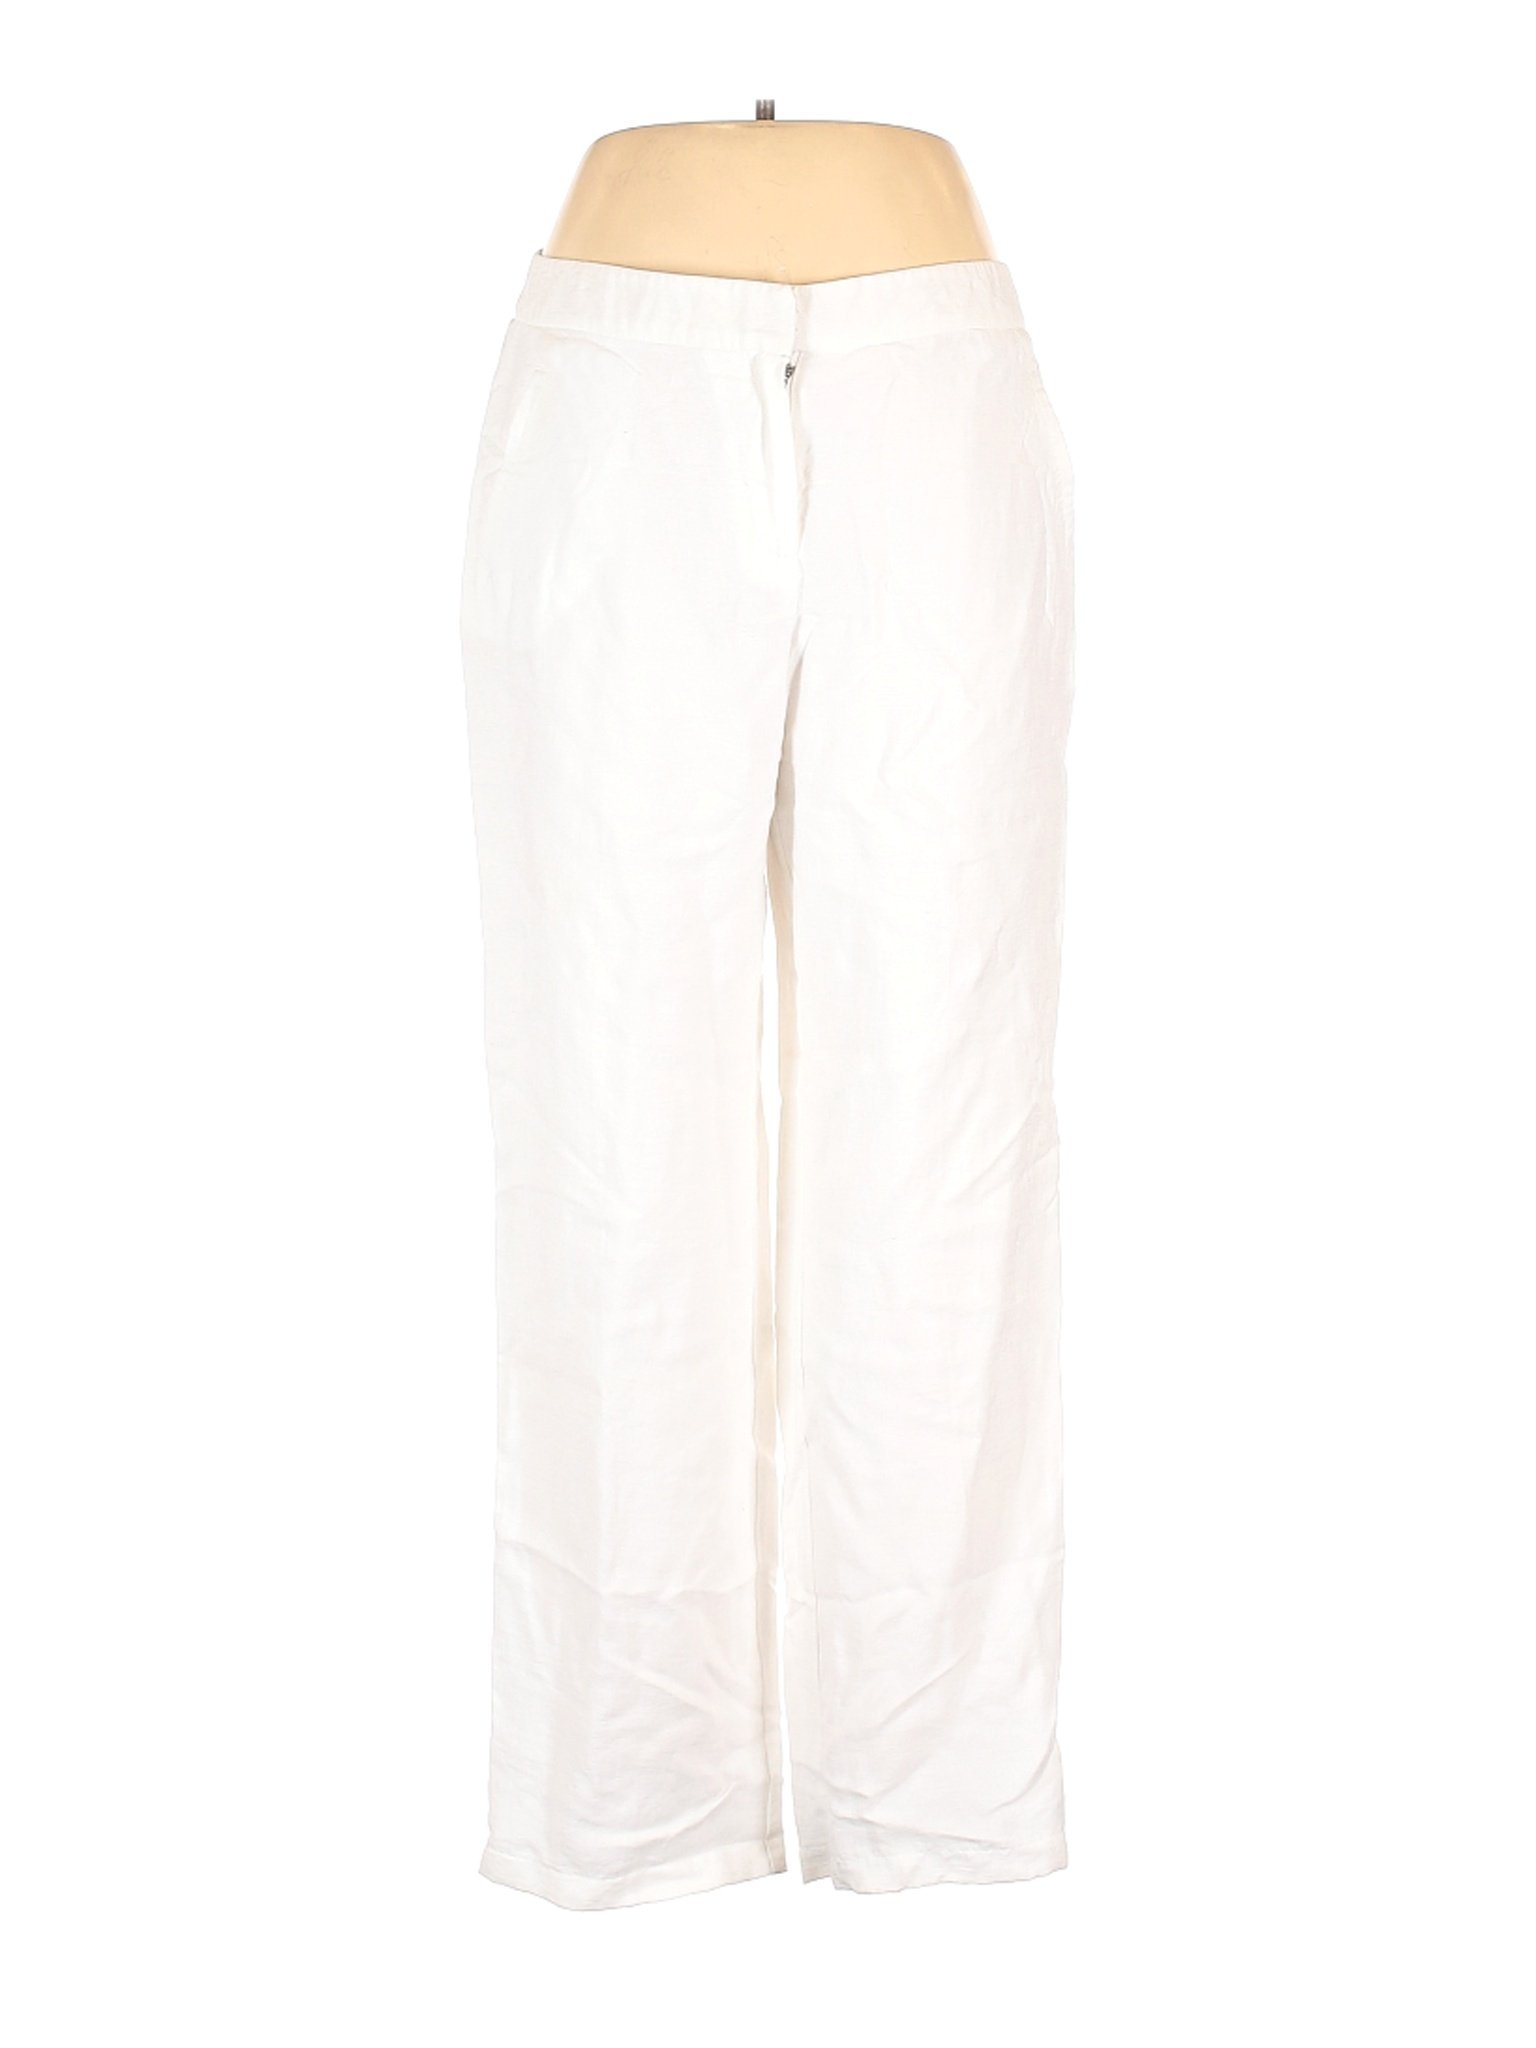 Travelers by Chico's Women White Casual Pants L | eBay